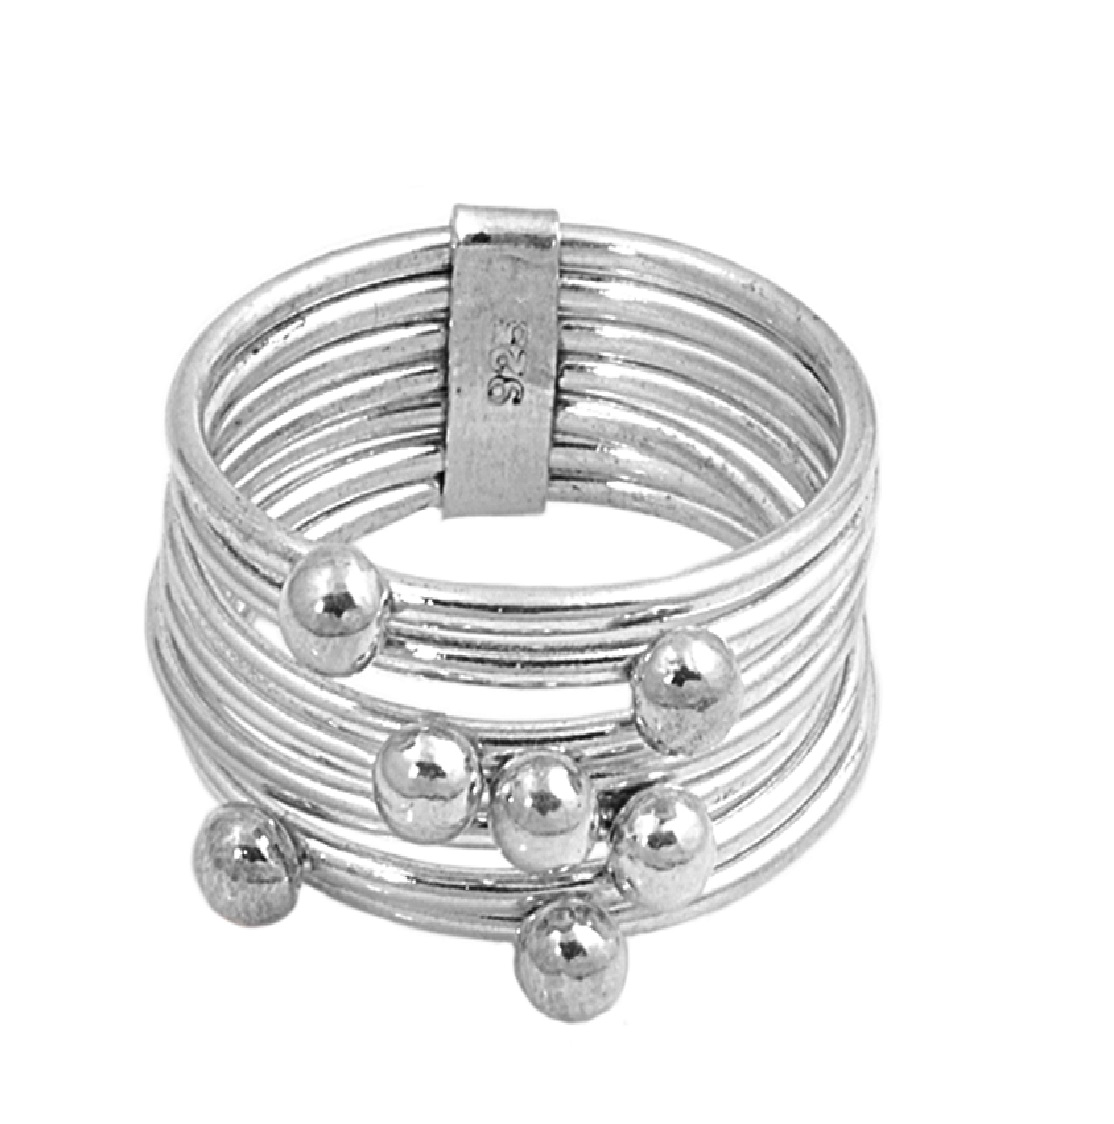 AllinStock Sterling Silver Wire Tension Style Ring 